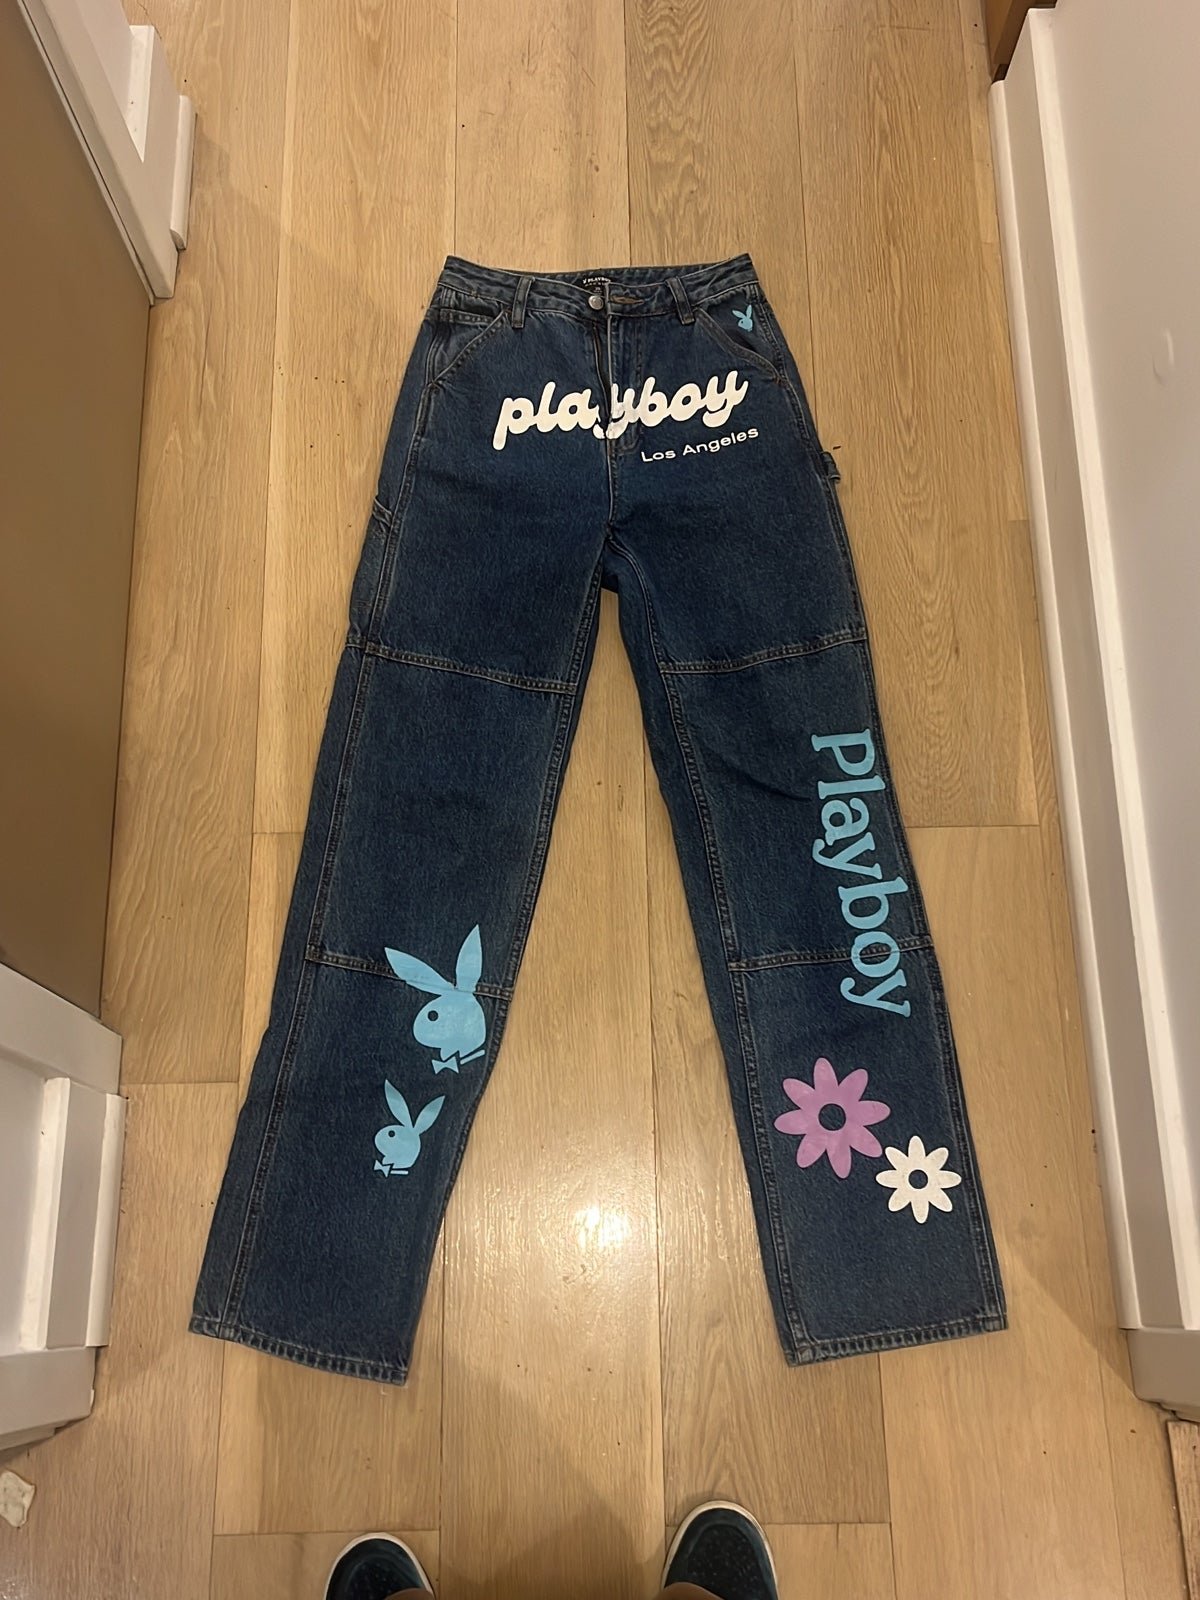 Exclusive Playboy jeans O5Br8upBN Low Price